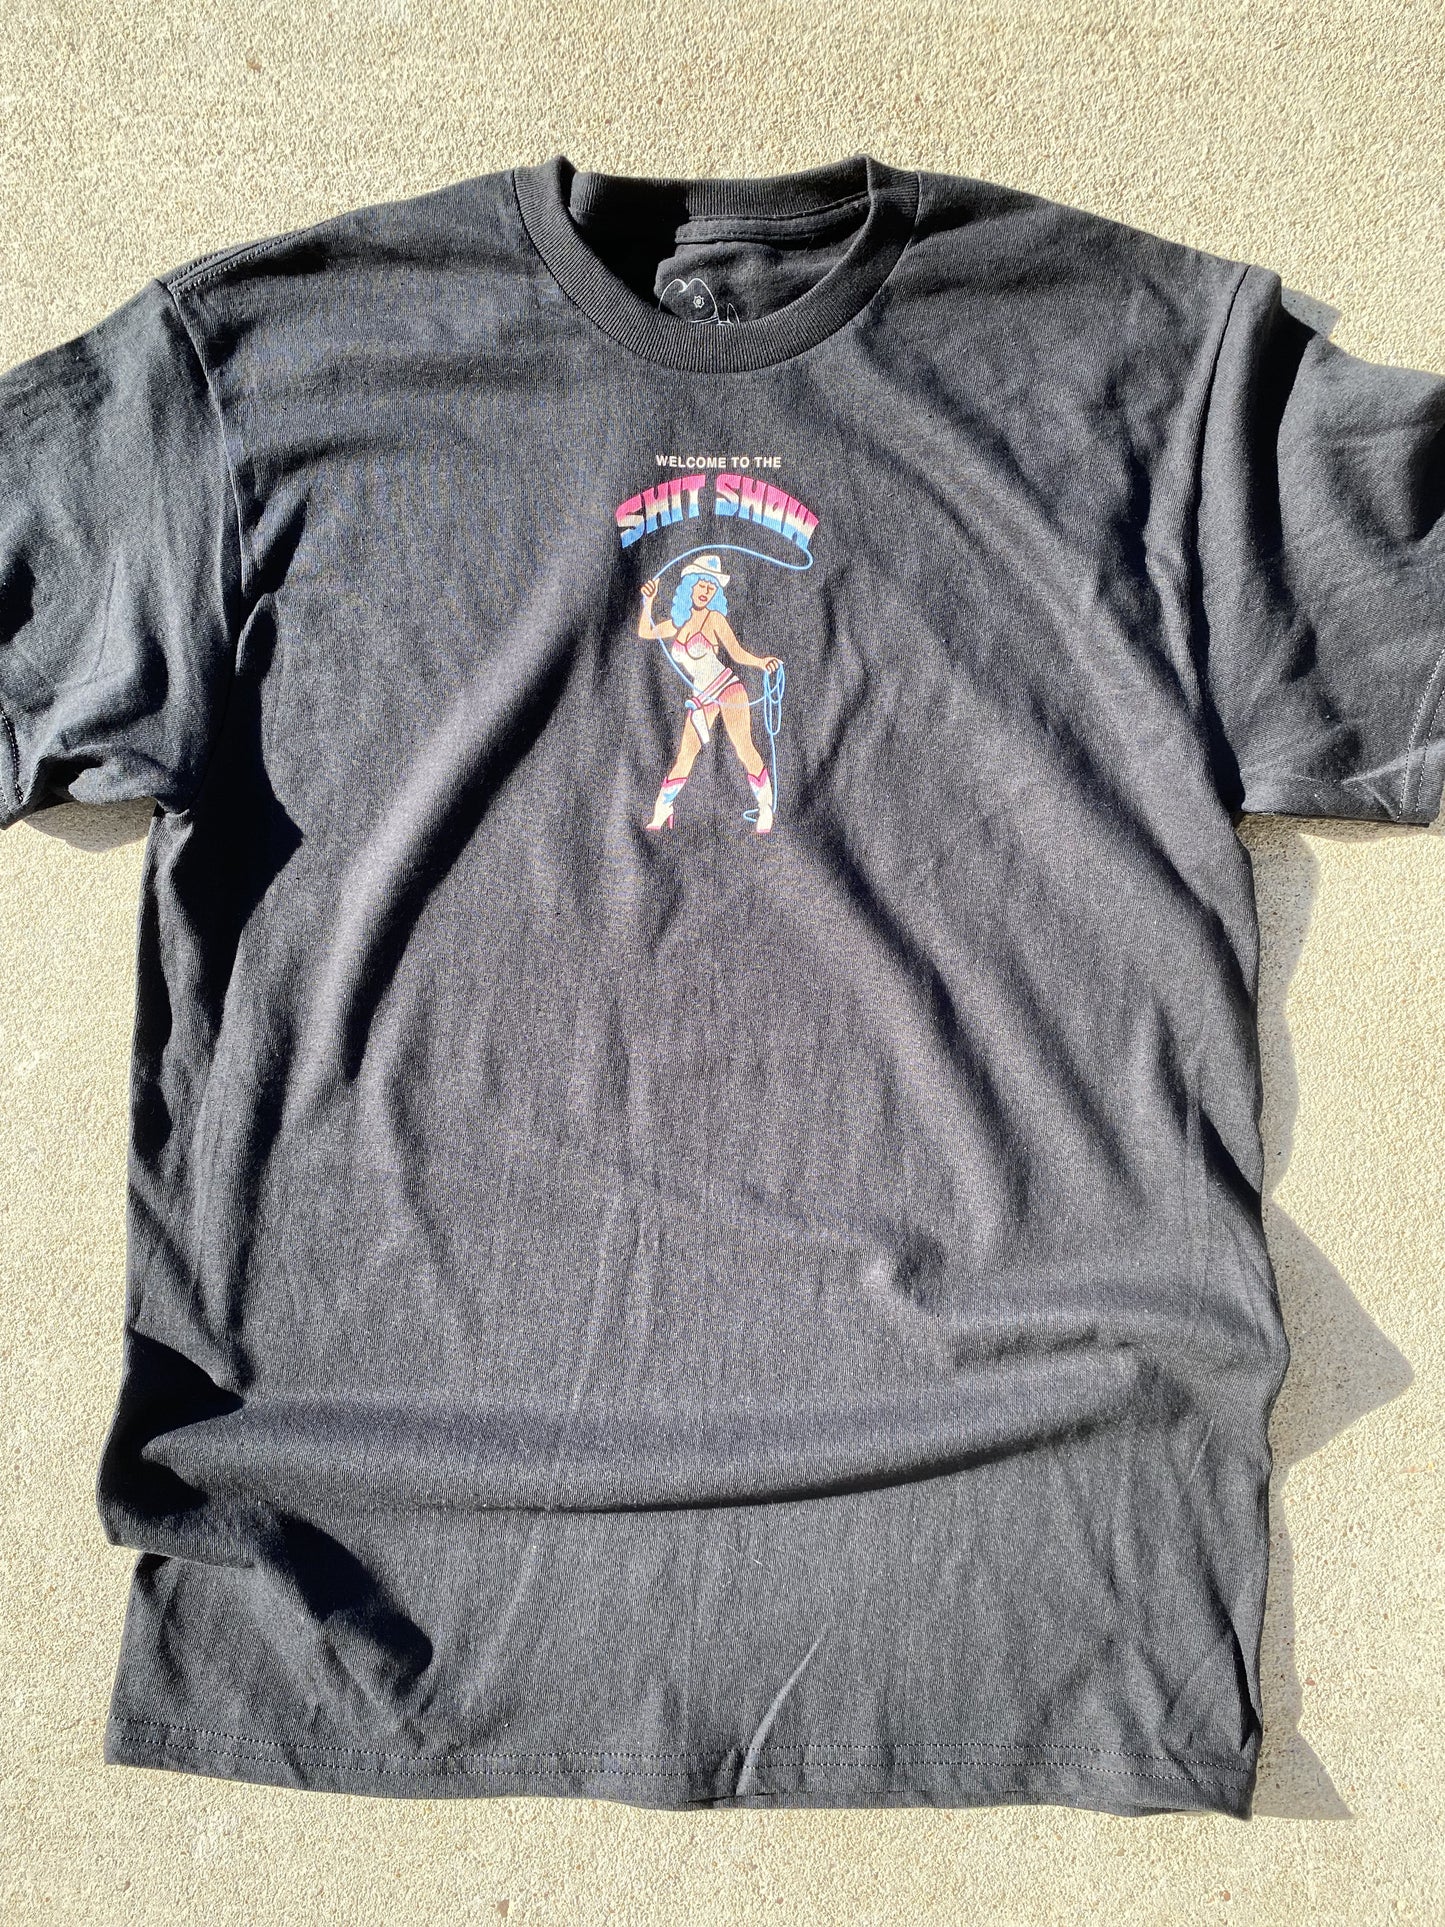 A black short sleeve t-shirt that reads Welcome to the Shit Show. The last 2 words are in a large font in rainbow colors of light blue, white and pink. Below the words is a cowgirl with blue hair in a white bathing suit and white boots. She is holding a blue lasso and have a holster with a pistol.  Background is concrete.